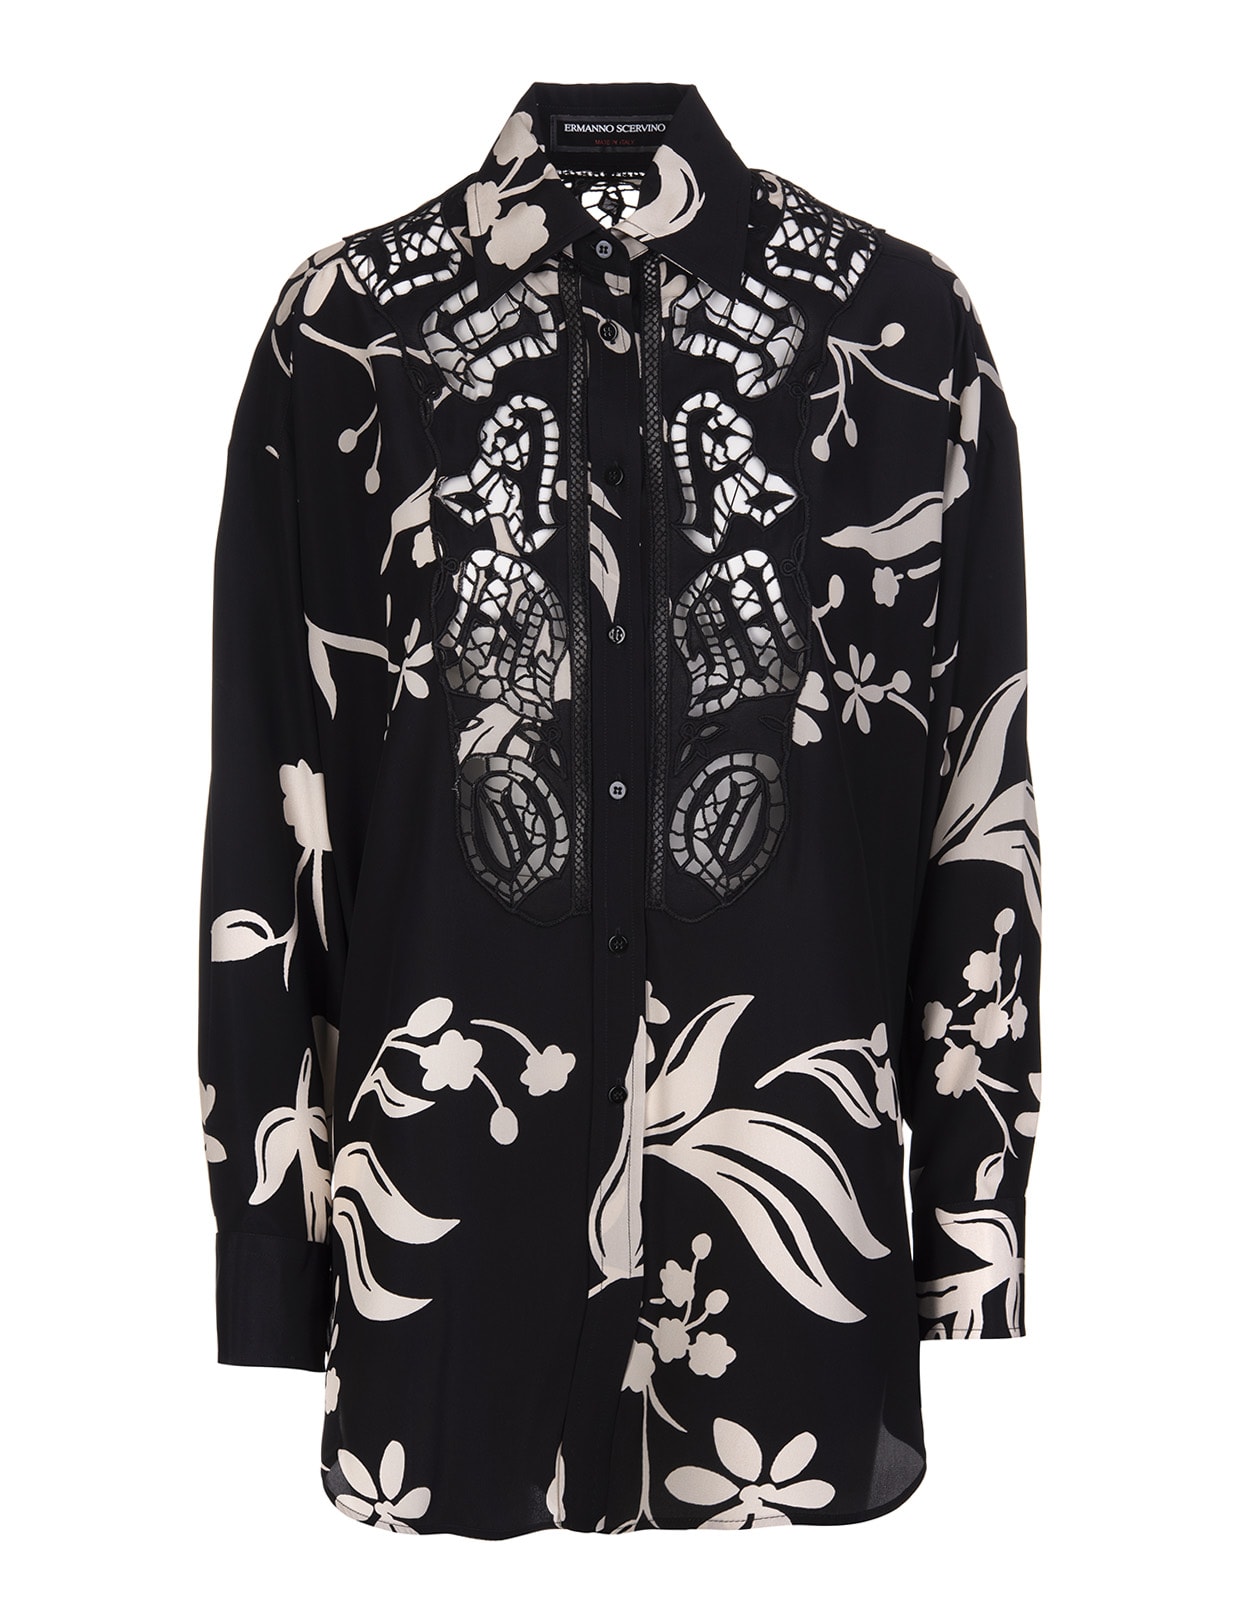 Ermanno Scervino Black And Ivory Shirt With Floral Print And Cutwork Lettering